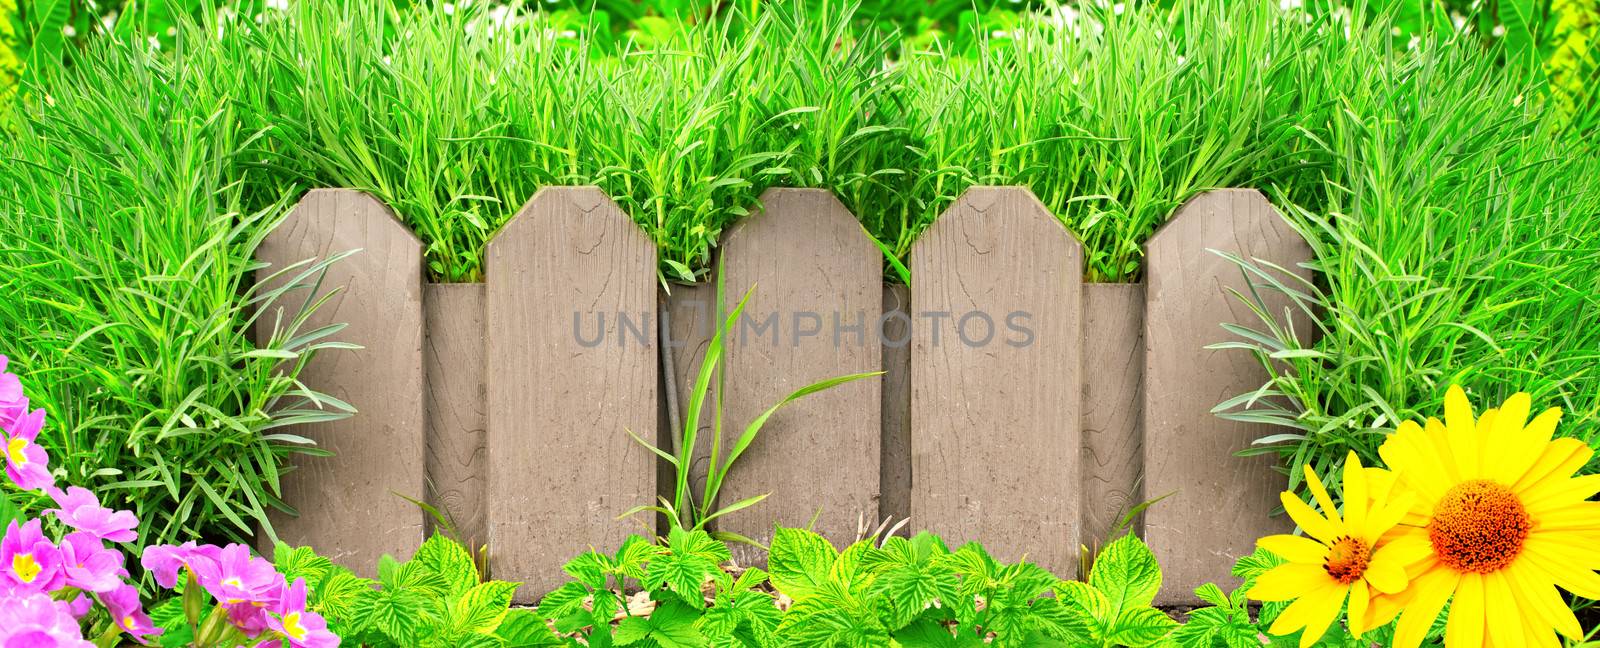 Wooden fence, flowers and green grass by frenta